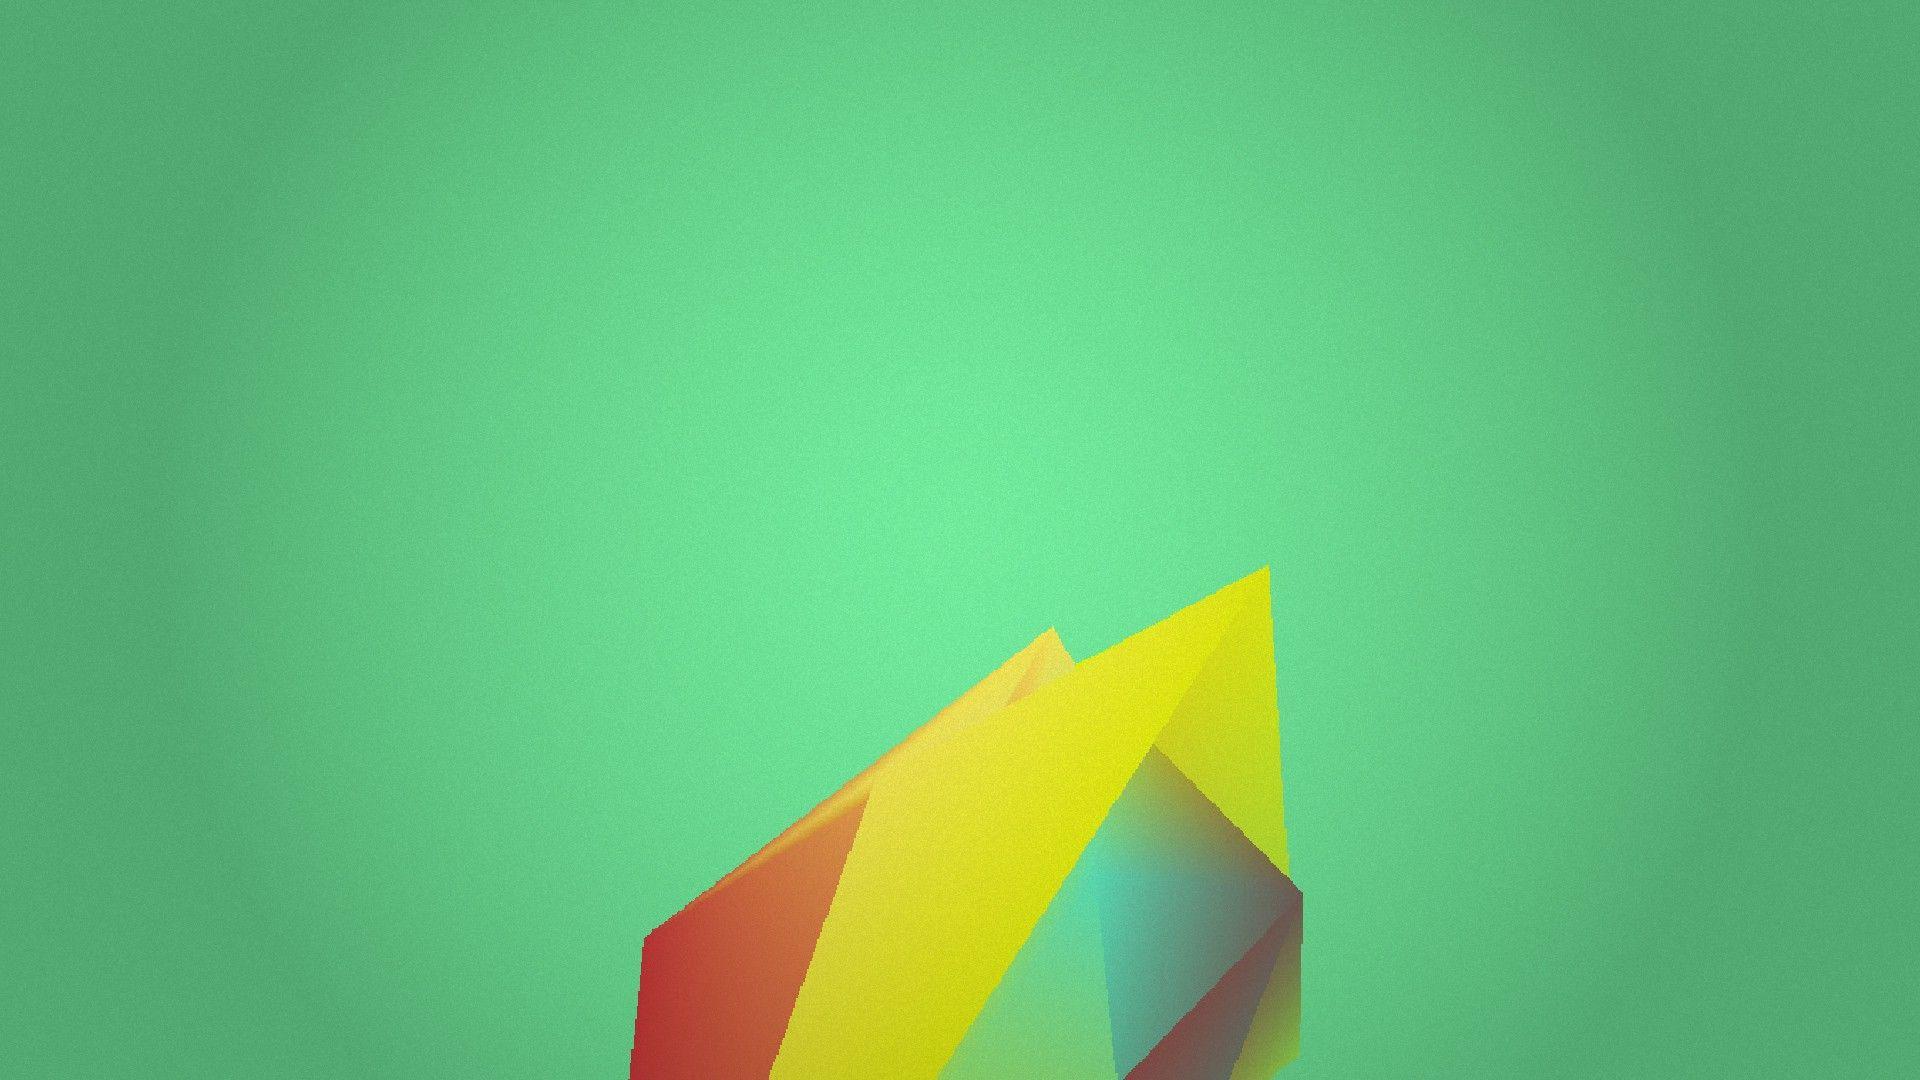 Yellow Triangle with Green Circle Logo - Wallpaper : colorful, illustration, digital art, abstract, pixel art ...